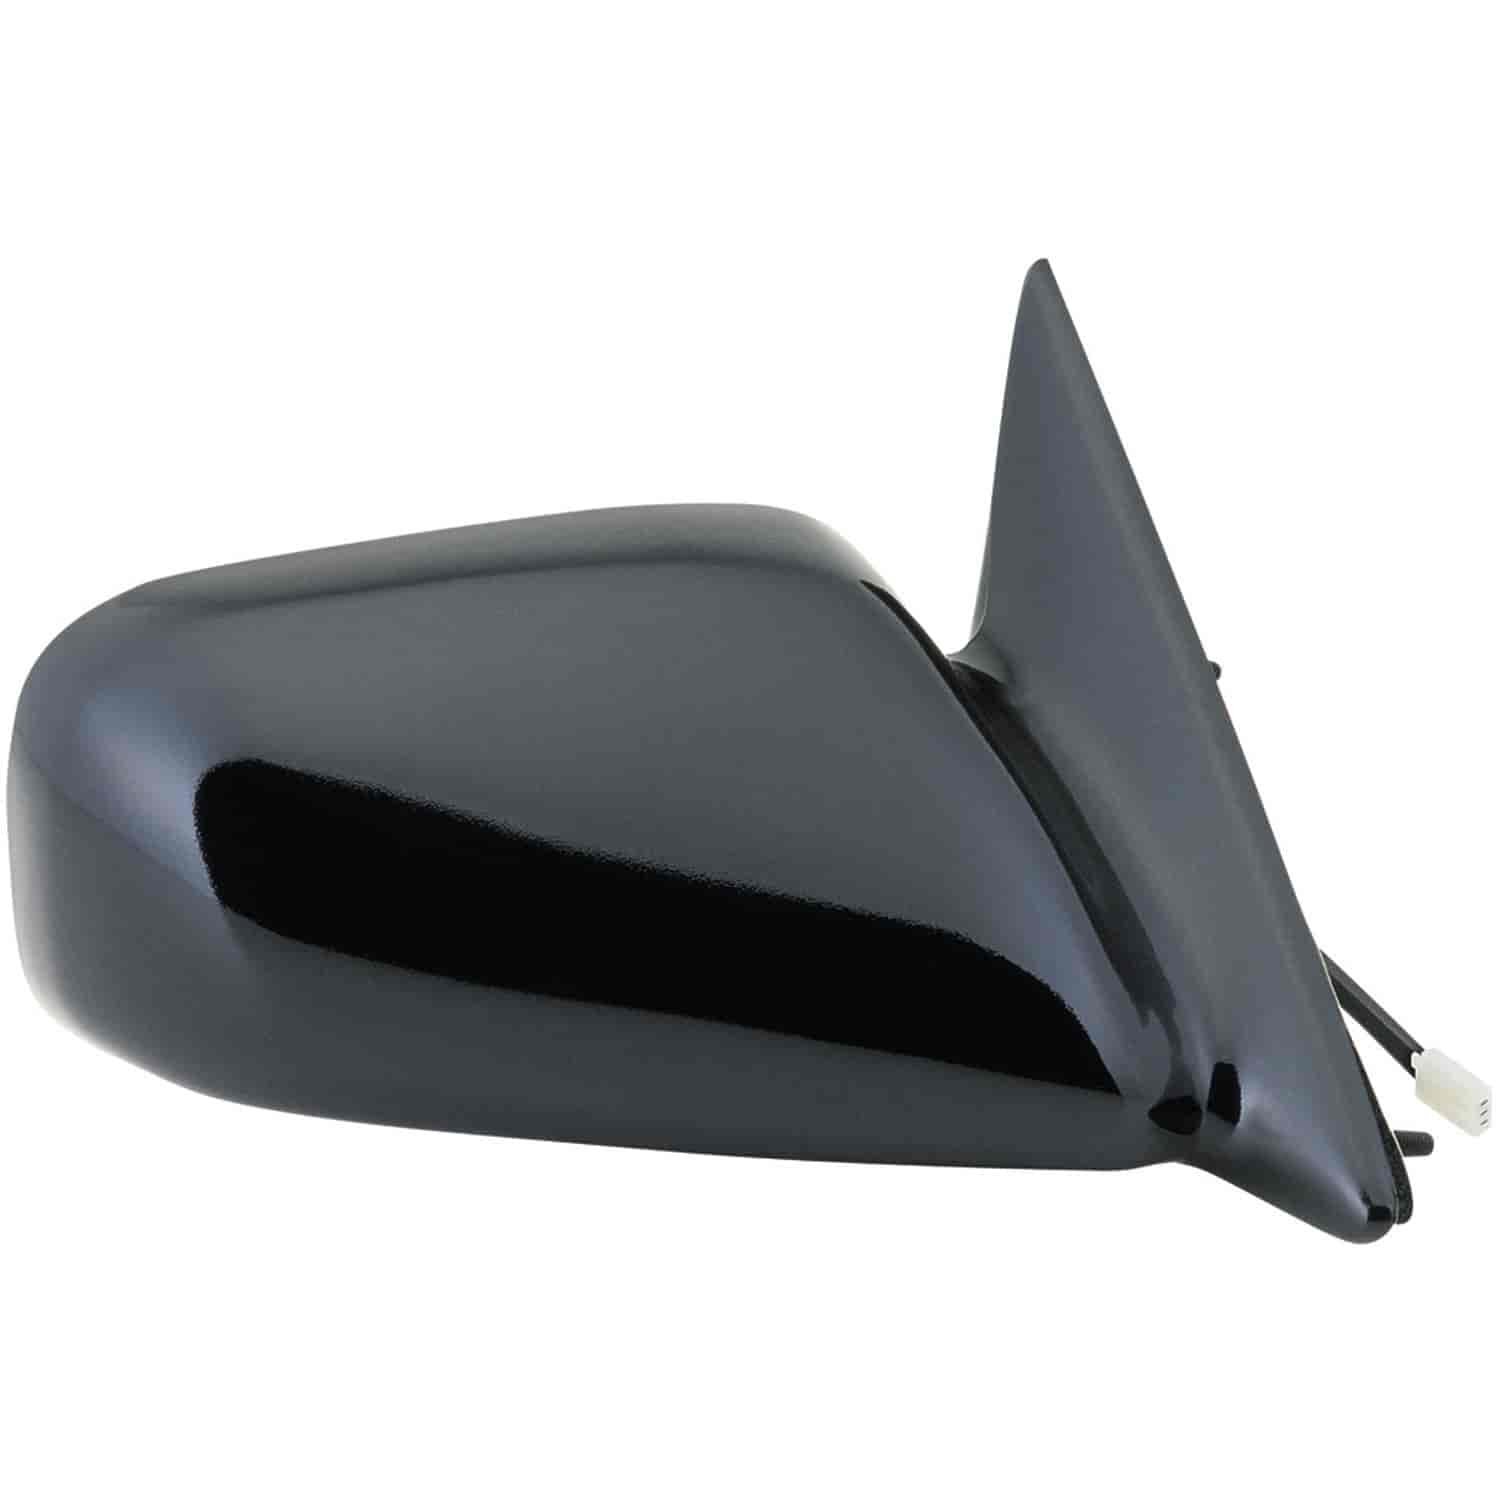 OEM Style Replacement mirror for 97-01 Toyota Camry US built passenger side mirror tested to fit and